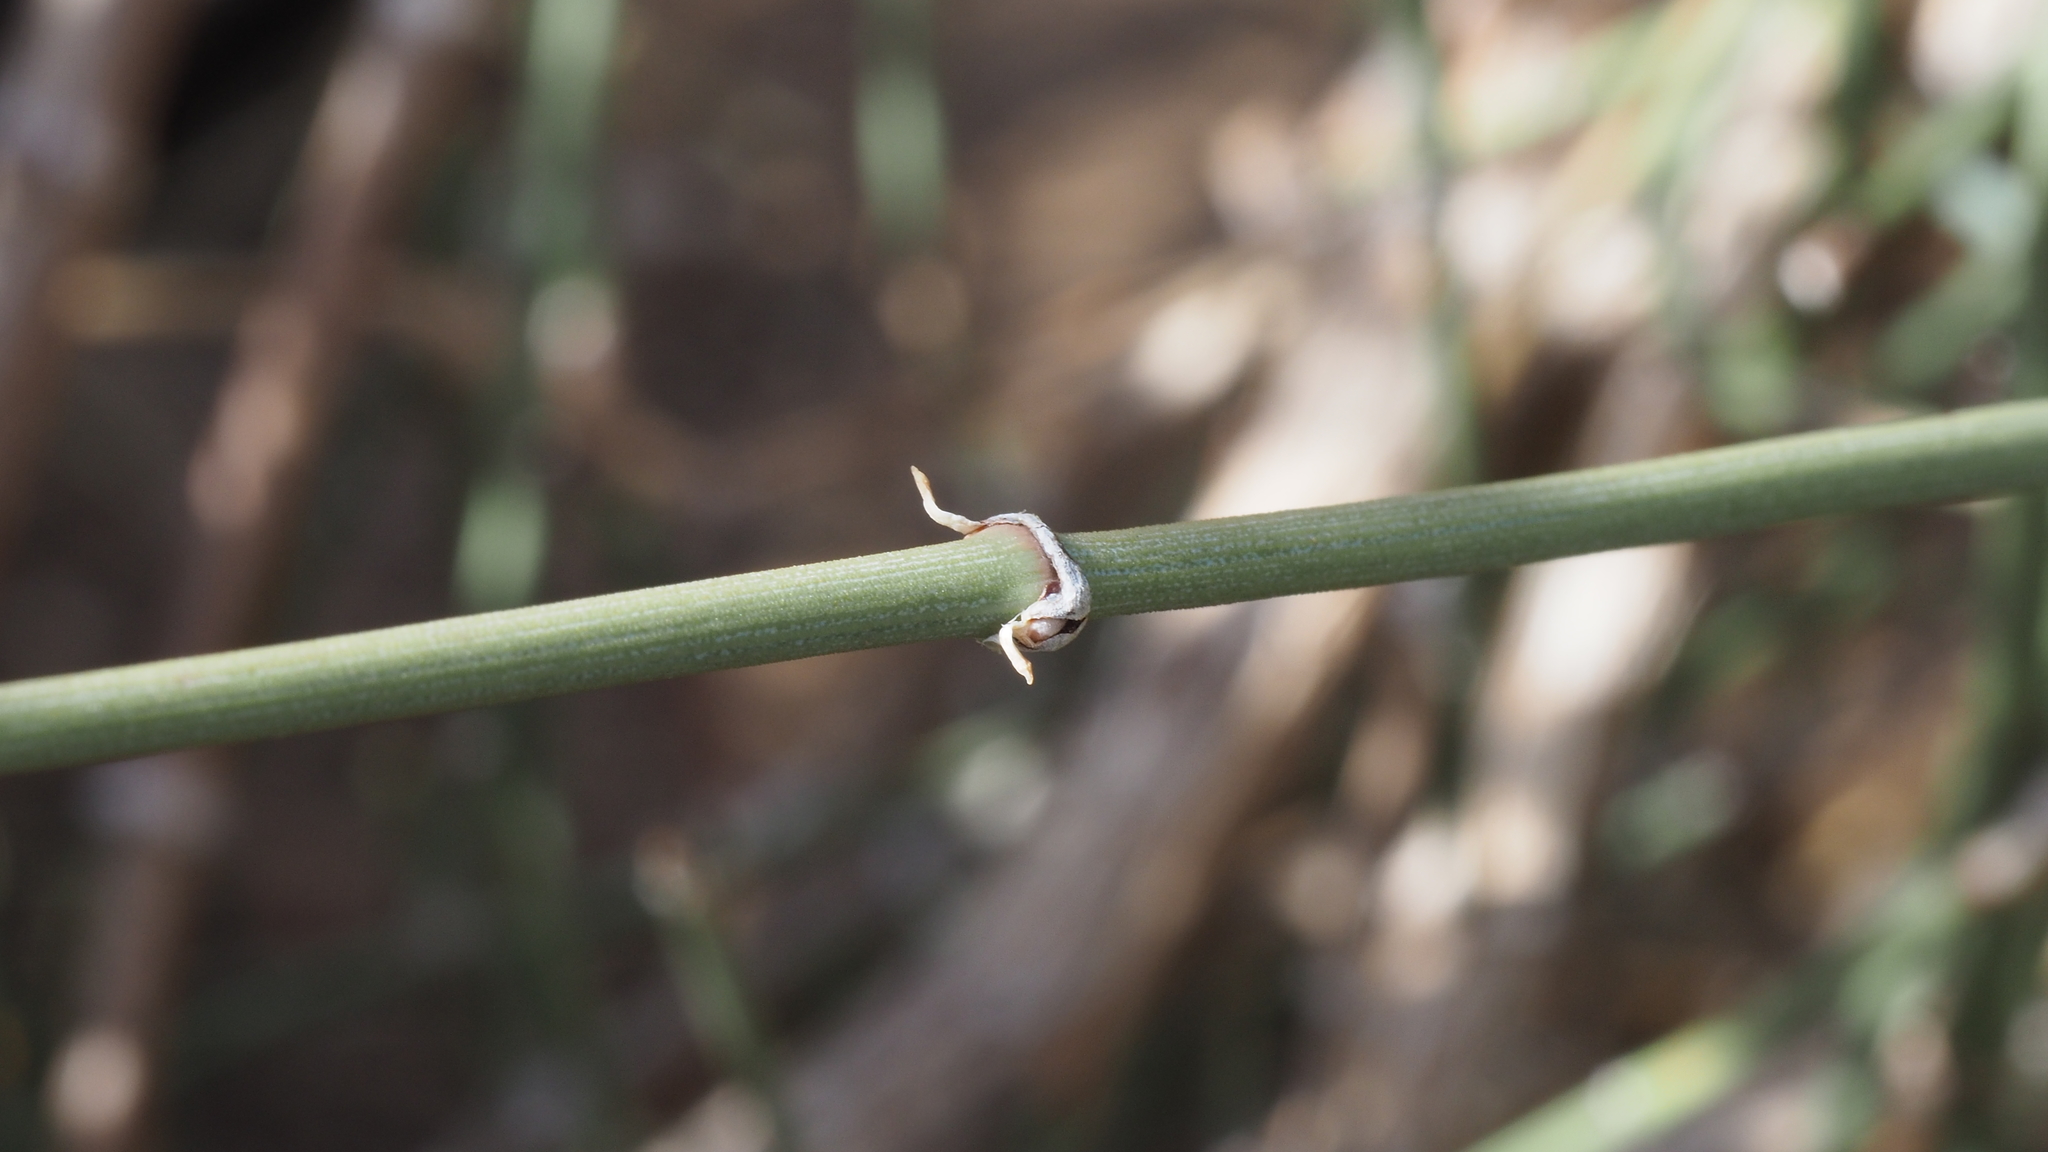 A thin stem with two tiny, scale-like leaves emerging from either side of a node